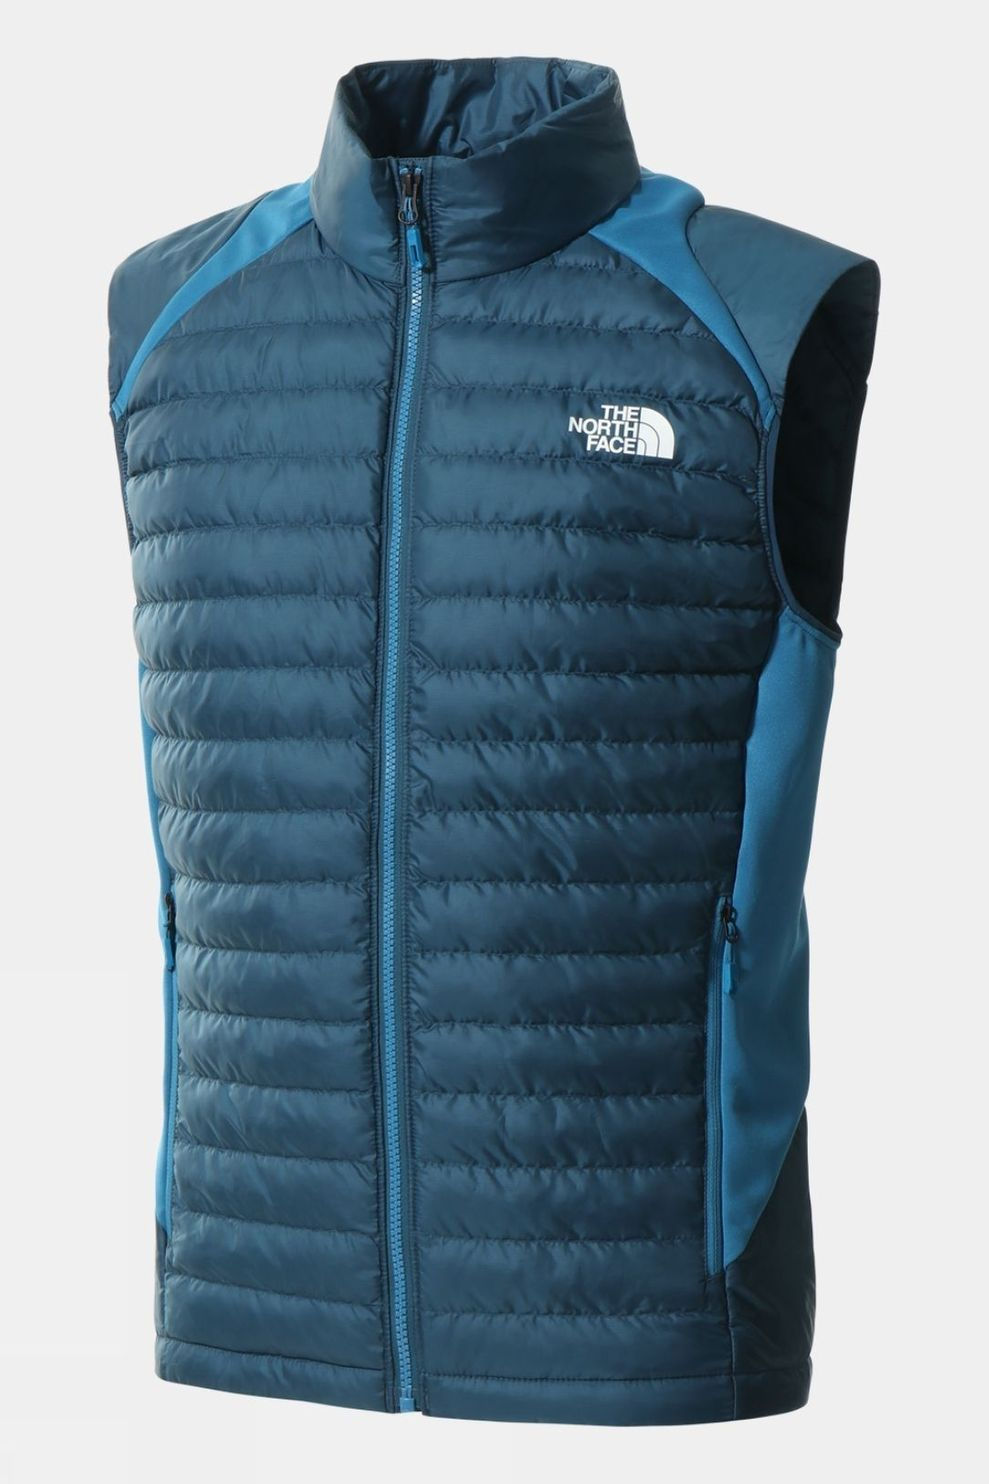 The North Face Mens Athletic Outdoor Insulated Hybrid Gilet